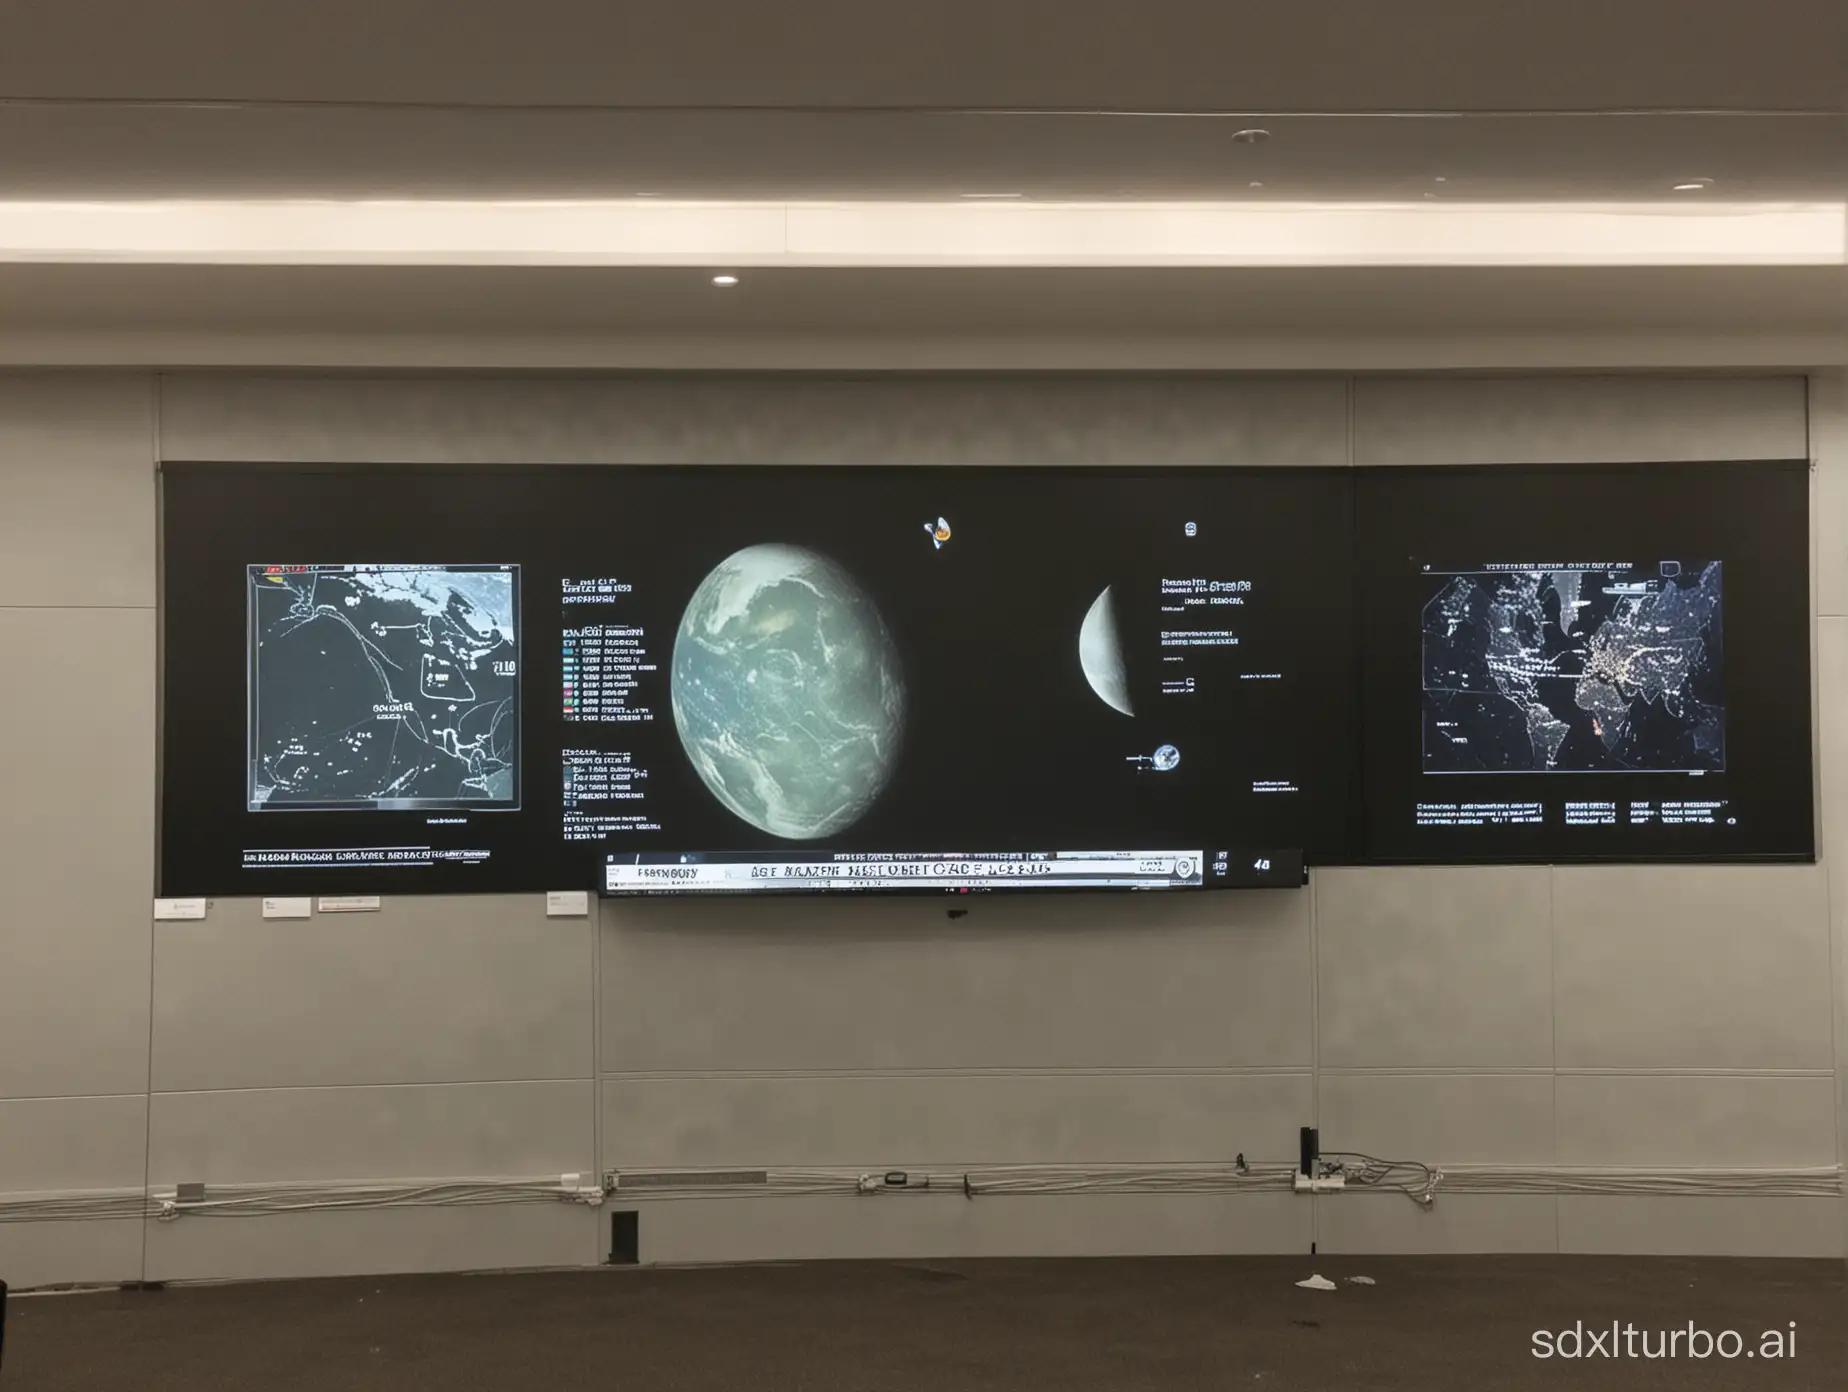 There were four huge screens in a room showing some Earth-moon information, rocket launch information, and there was nothing in the room except the screen, no people!no desk!